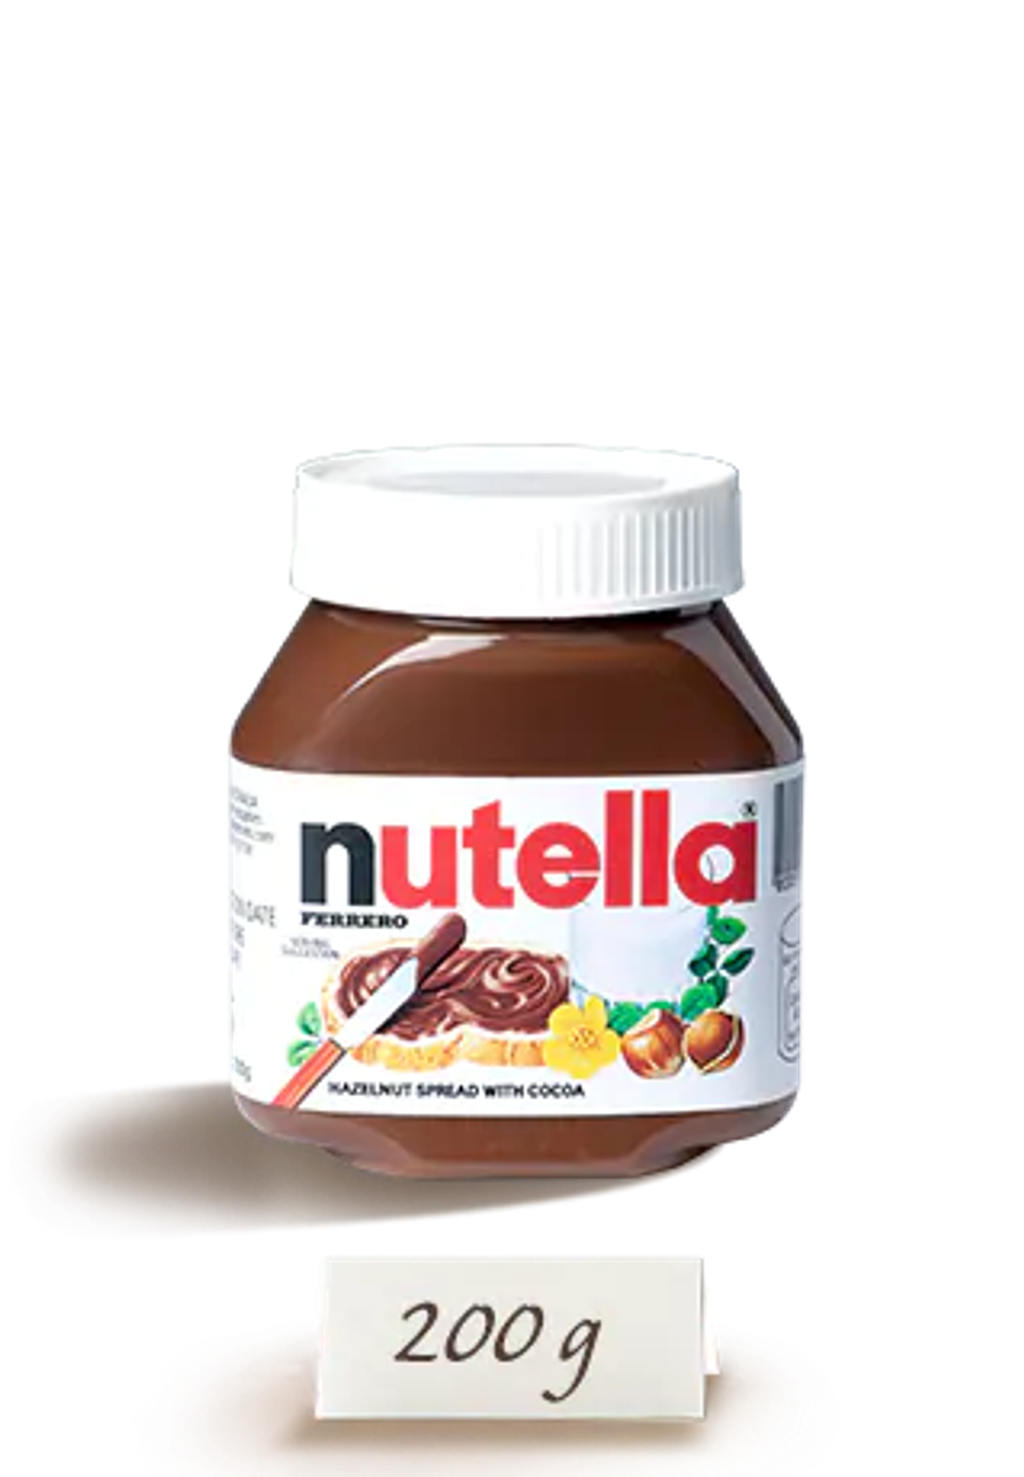 nutella 200g.png